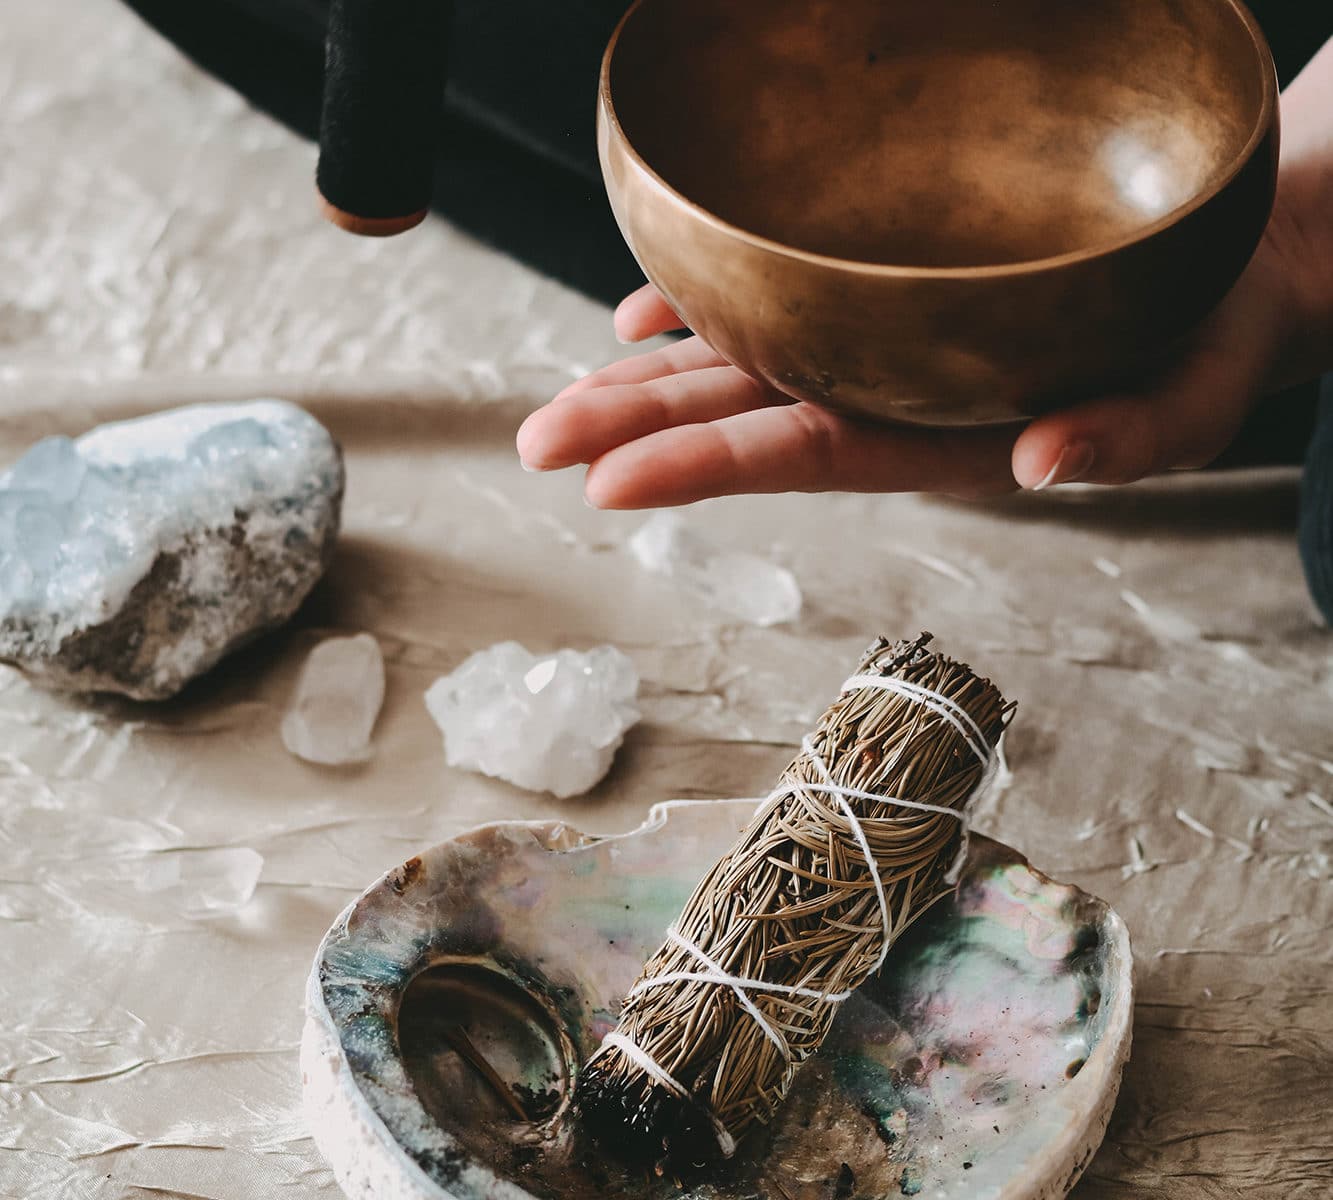 Crystal cleansing ritual, smudging, sound, and singing bowl